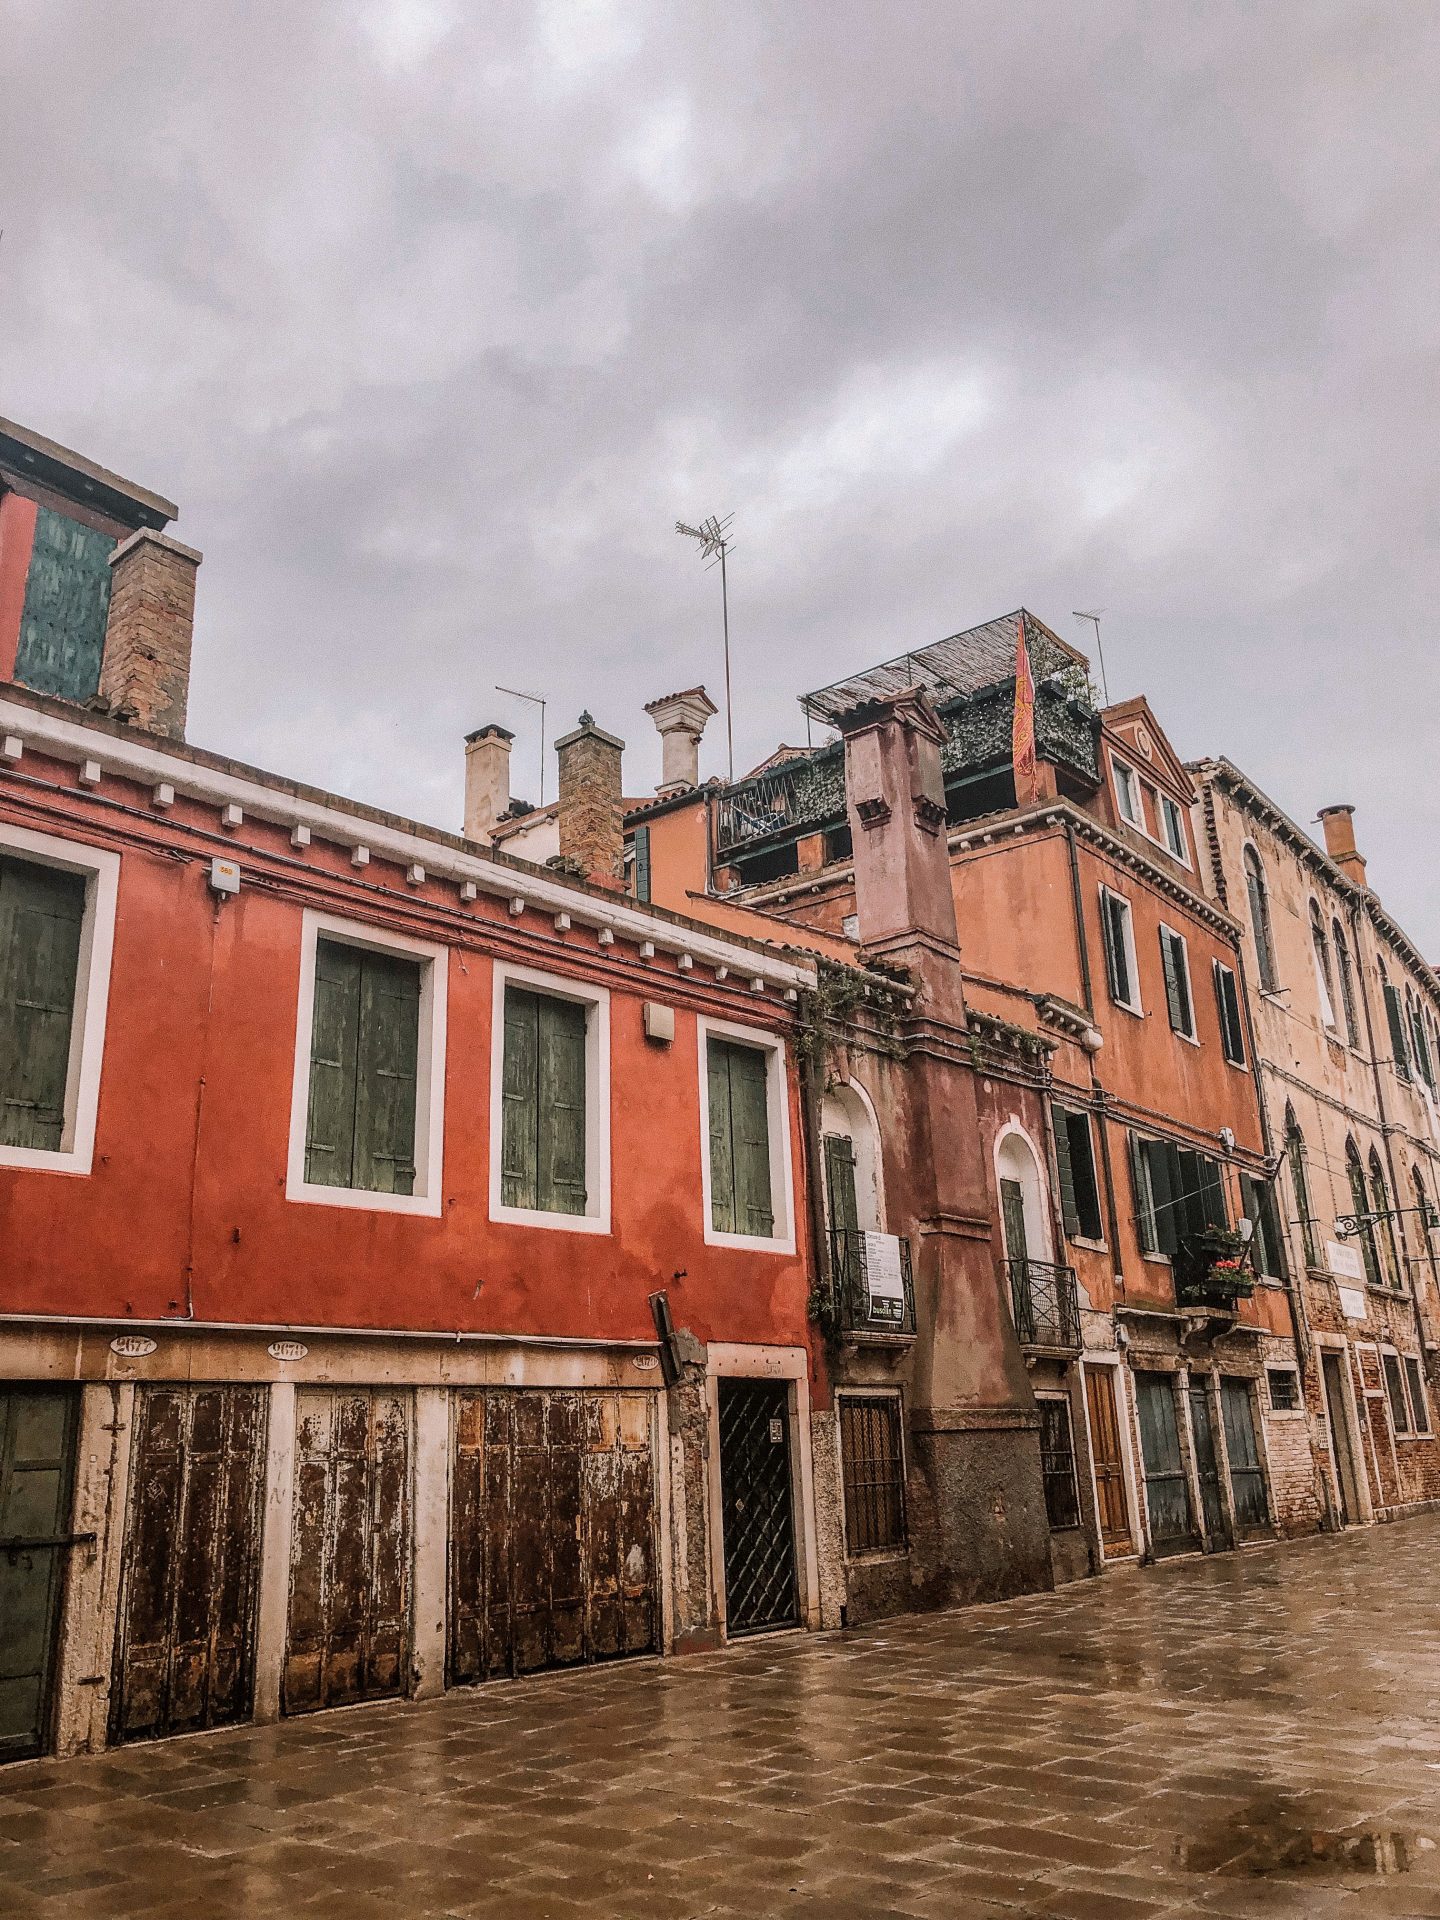 Buildings on a recently wet street in Venice, Italy